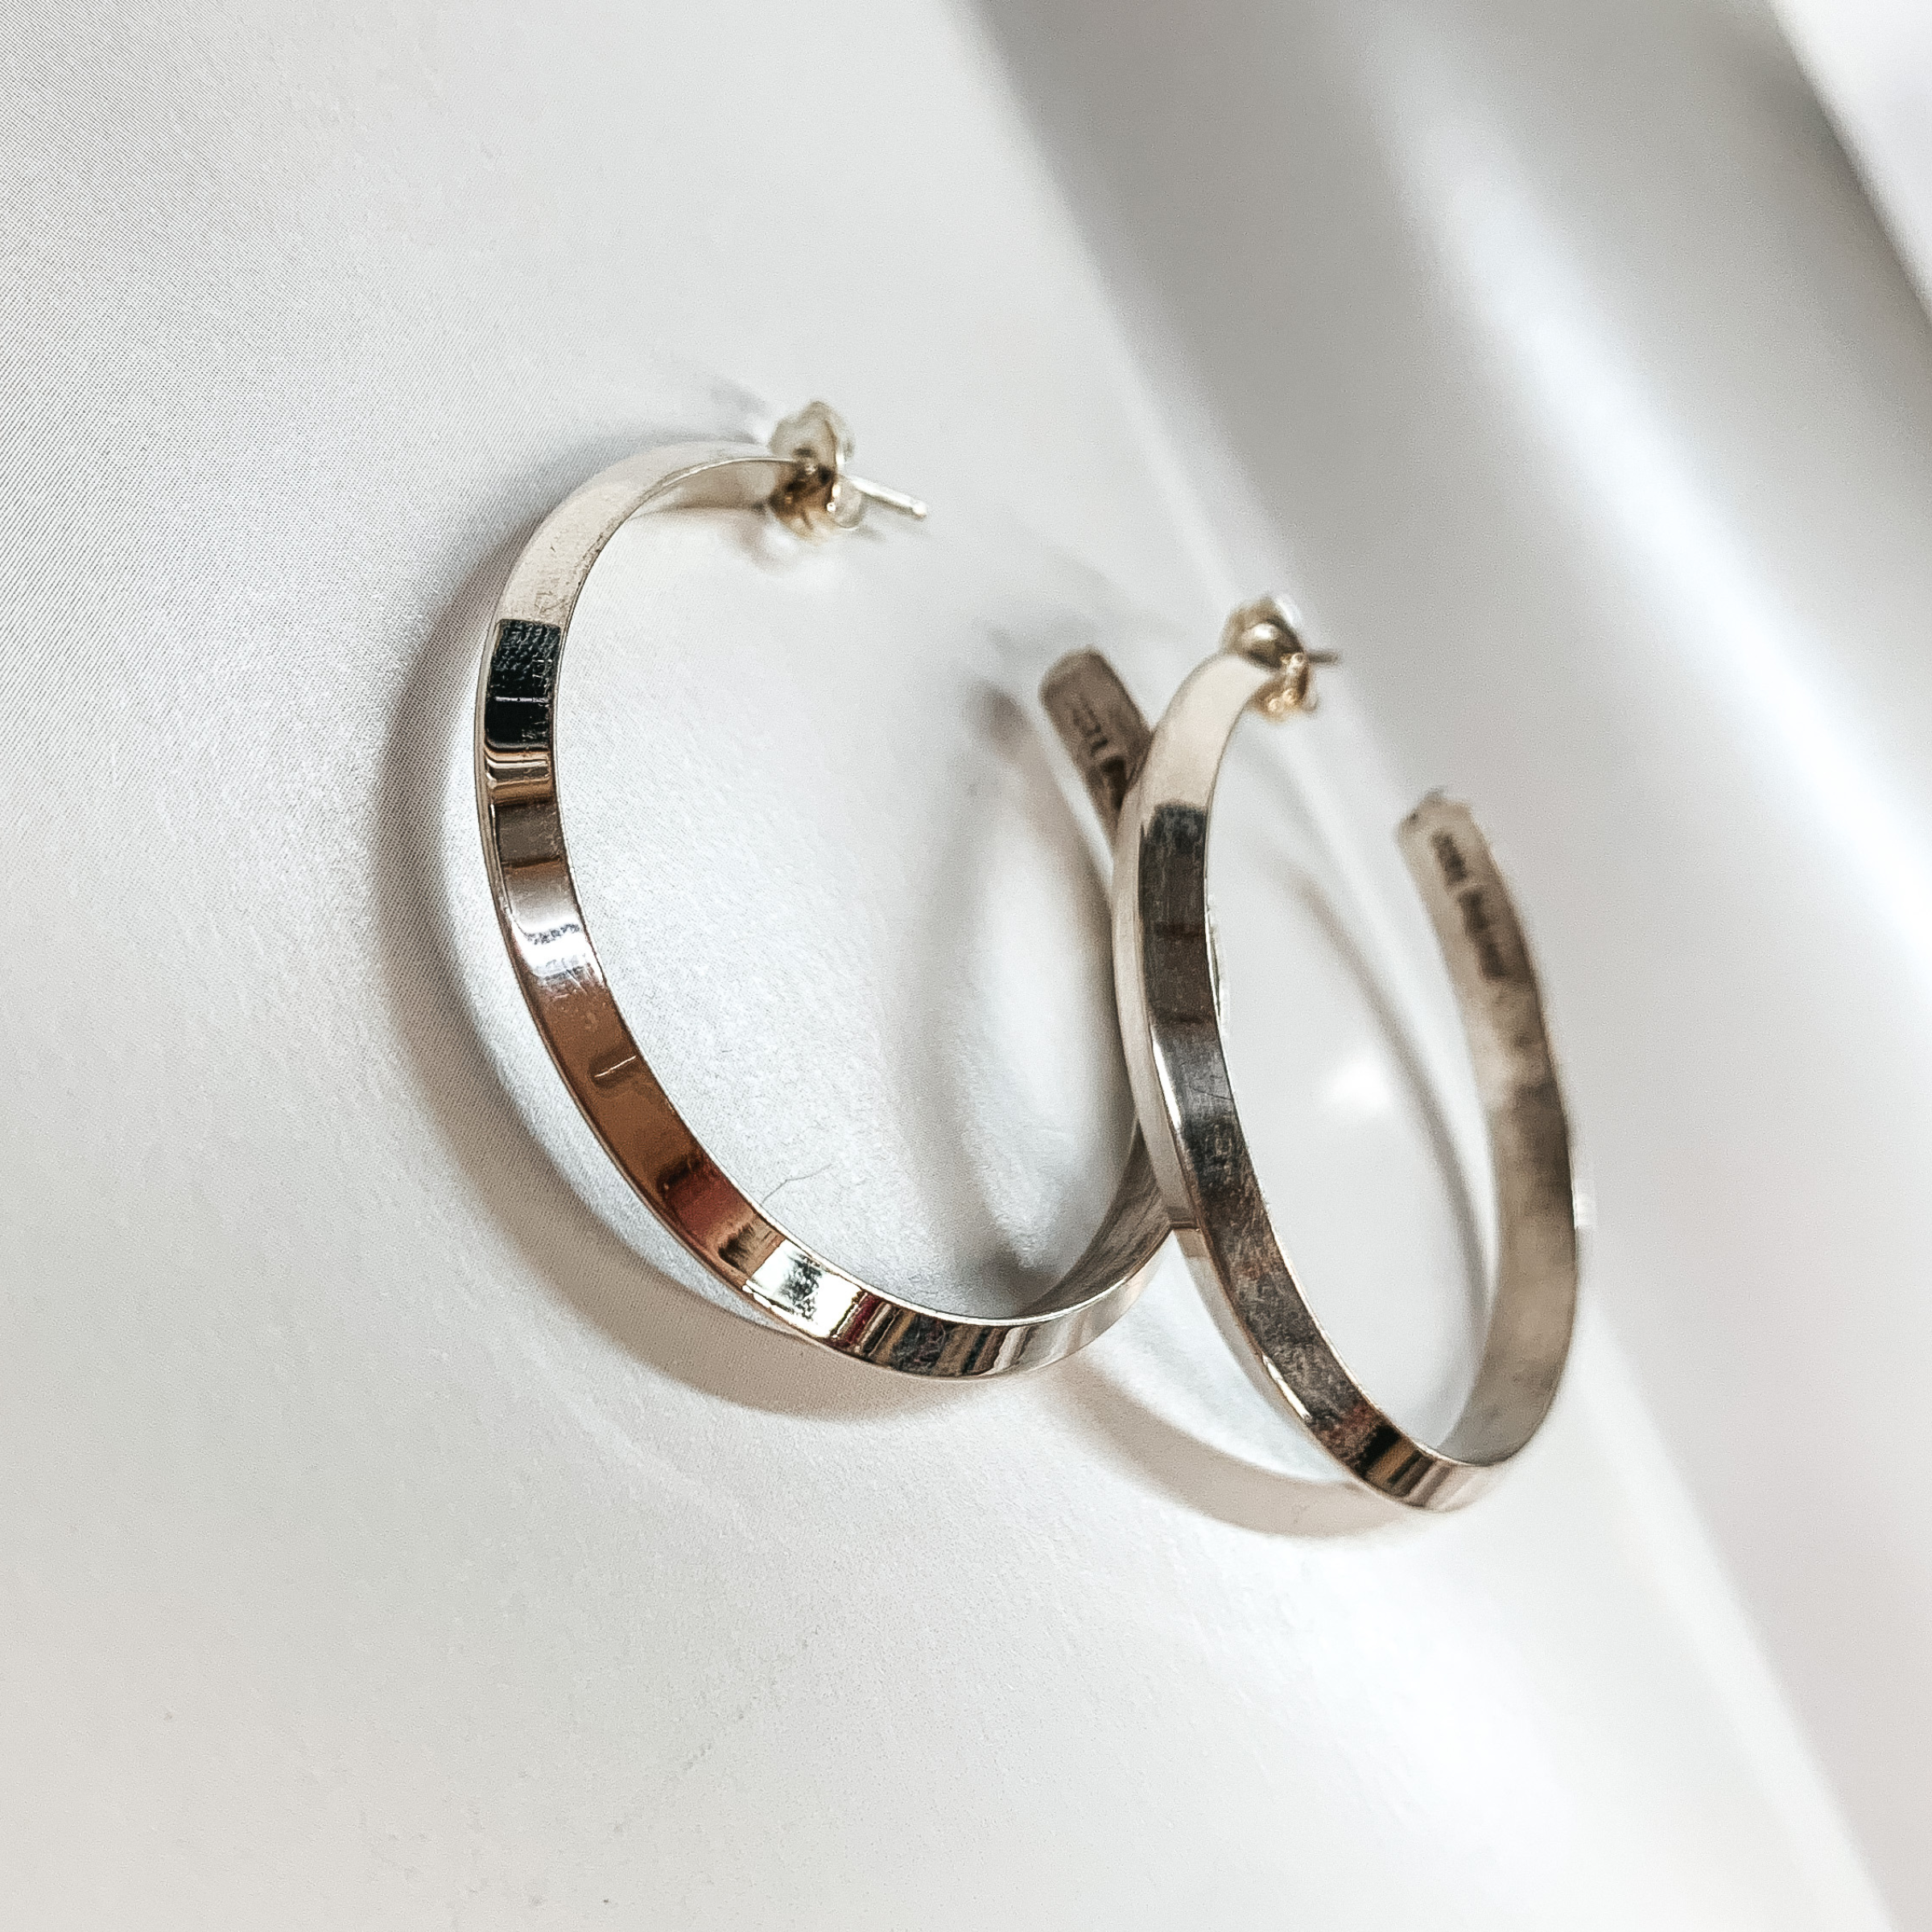 Navajo | Navajo Handmade Sterling Silver Pyramid Hoop Earrings - Giddy Up Glamour Boutique